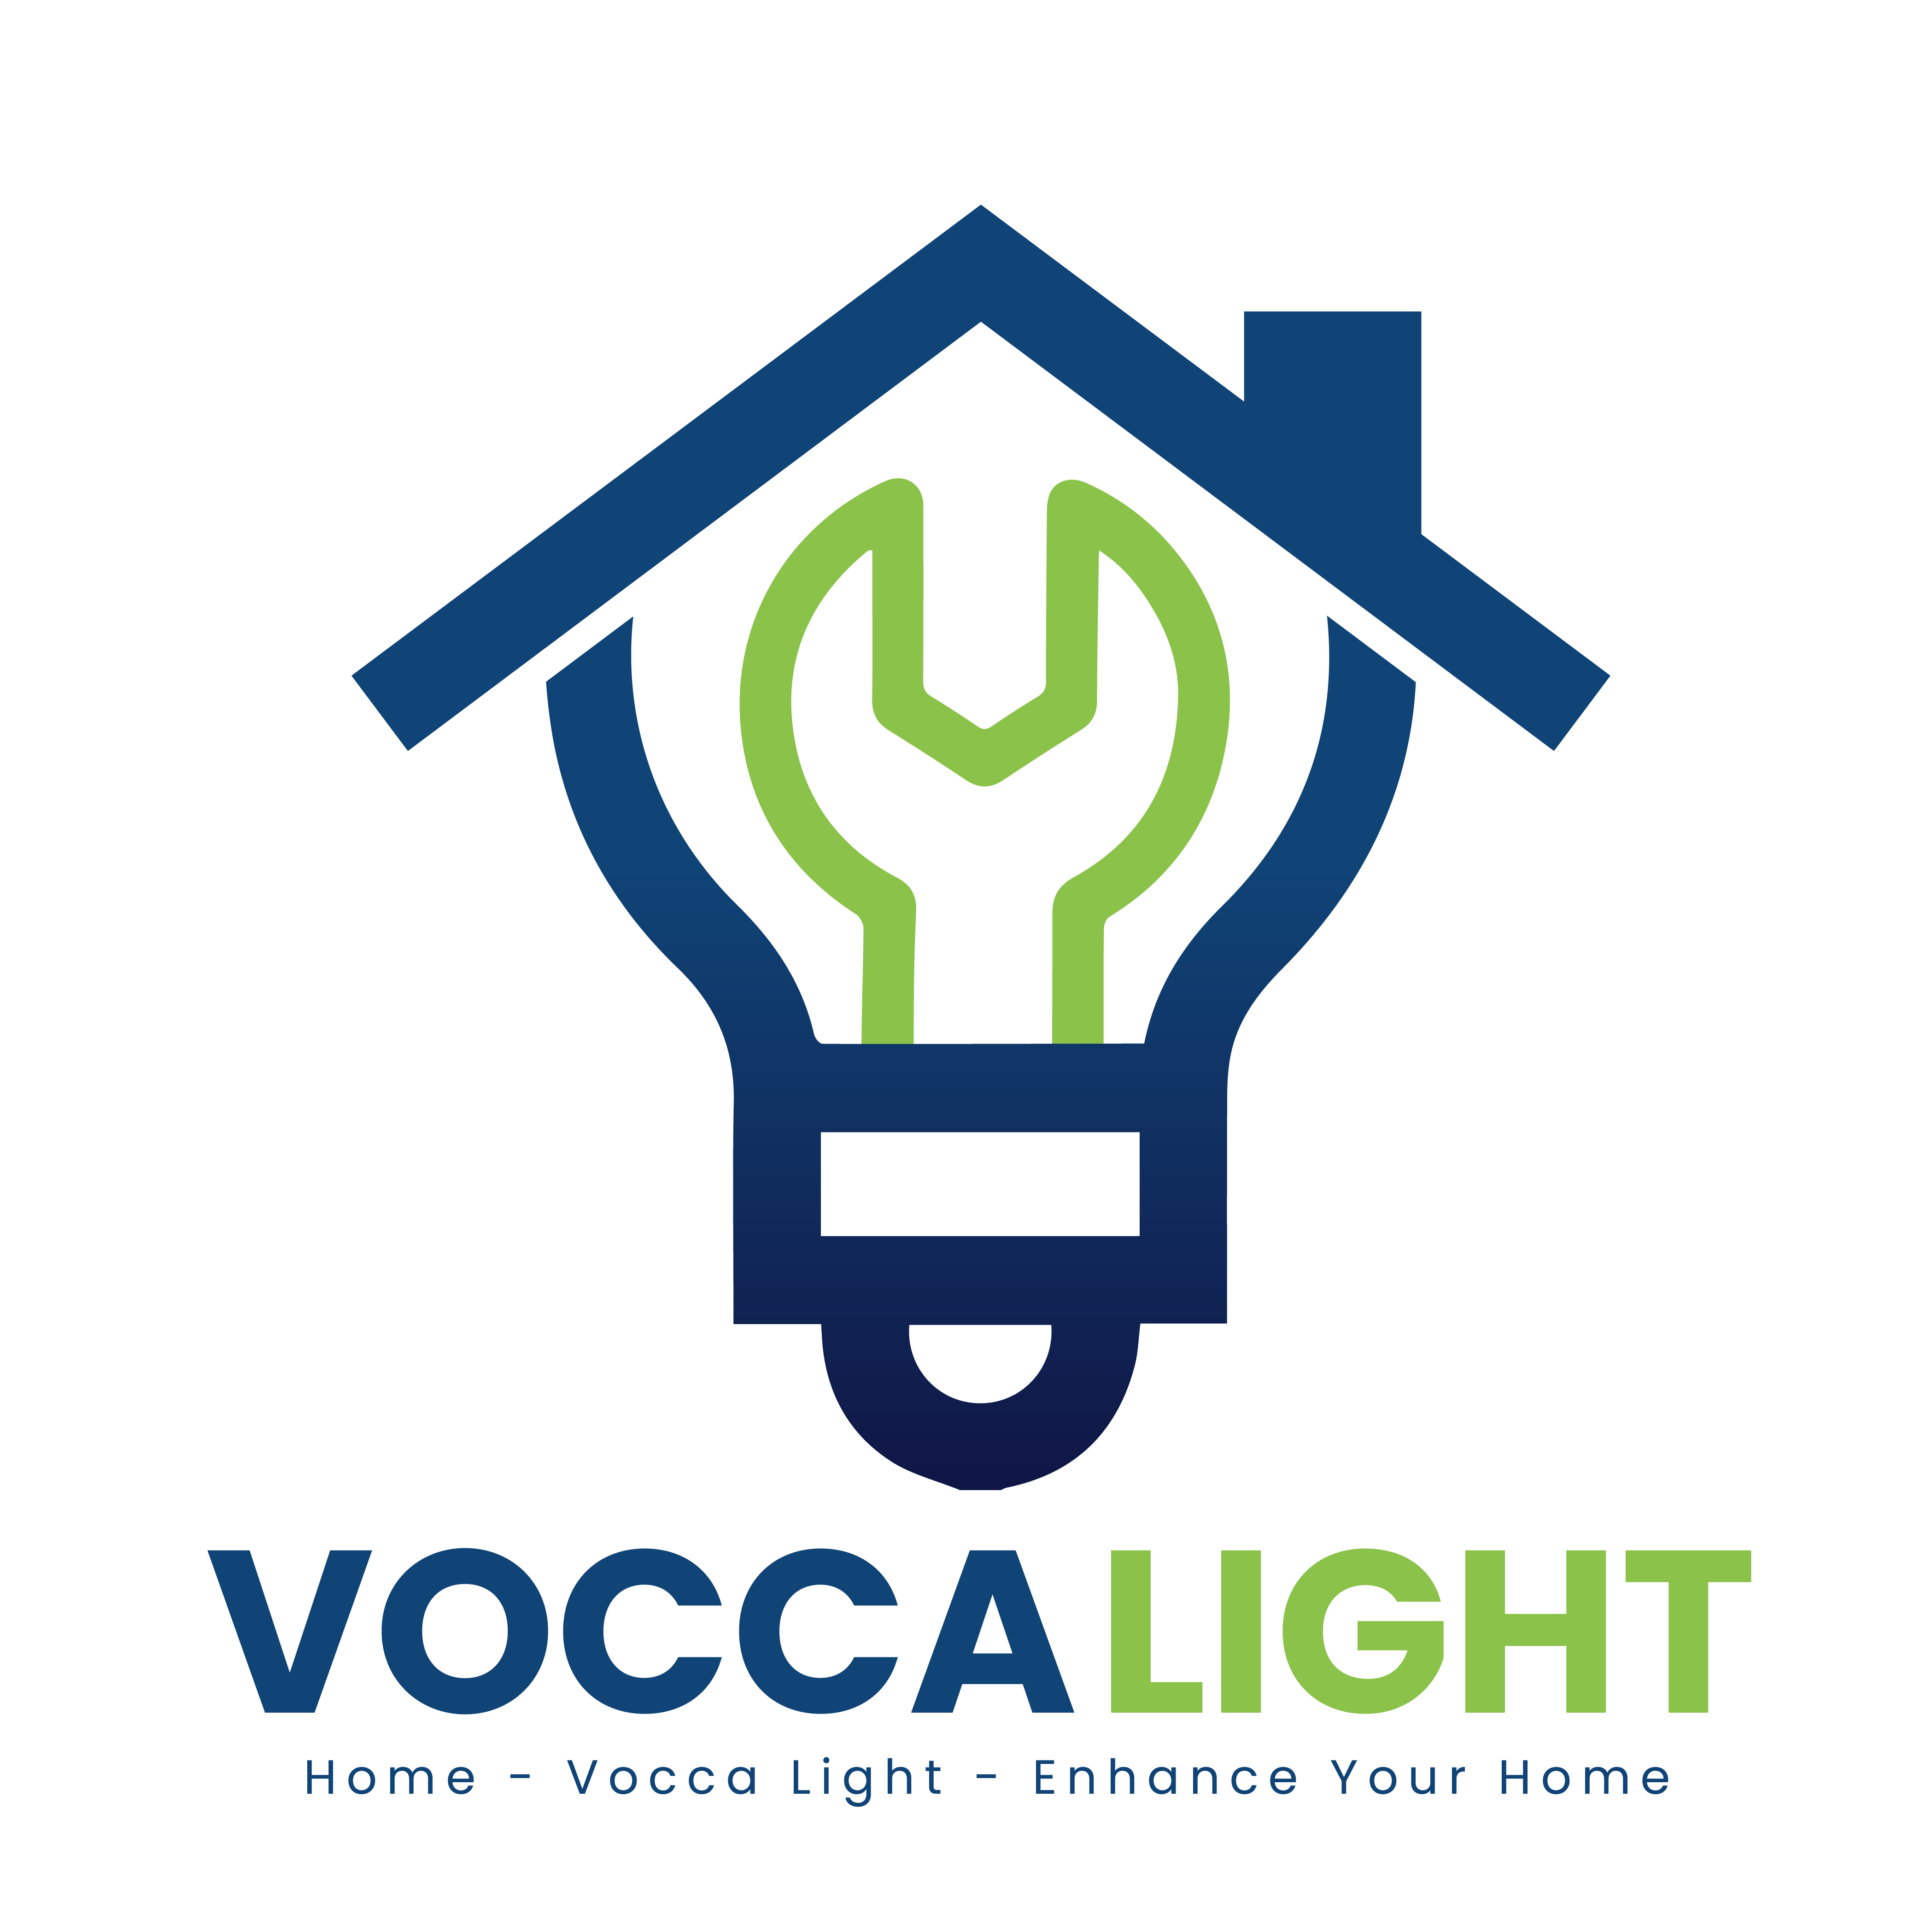 Vocca Light -Enhance Your Home: Your One-Stop Shop for Expert Home Improvement Tips, DIY Projects, and More!